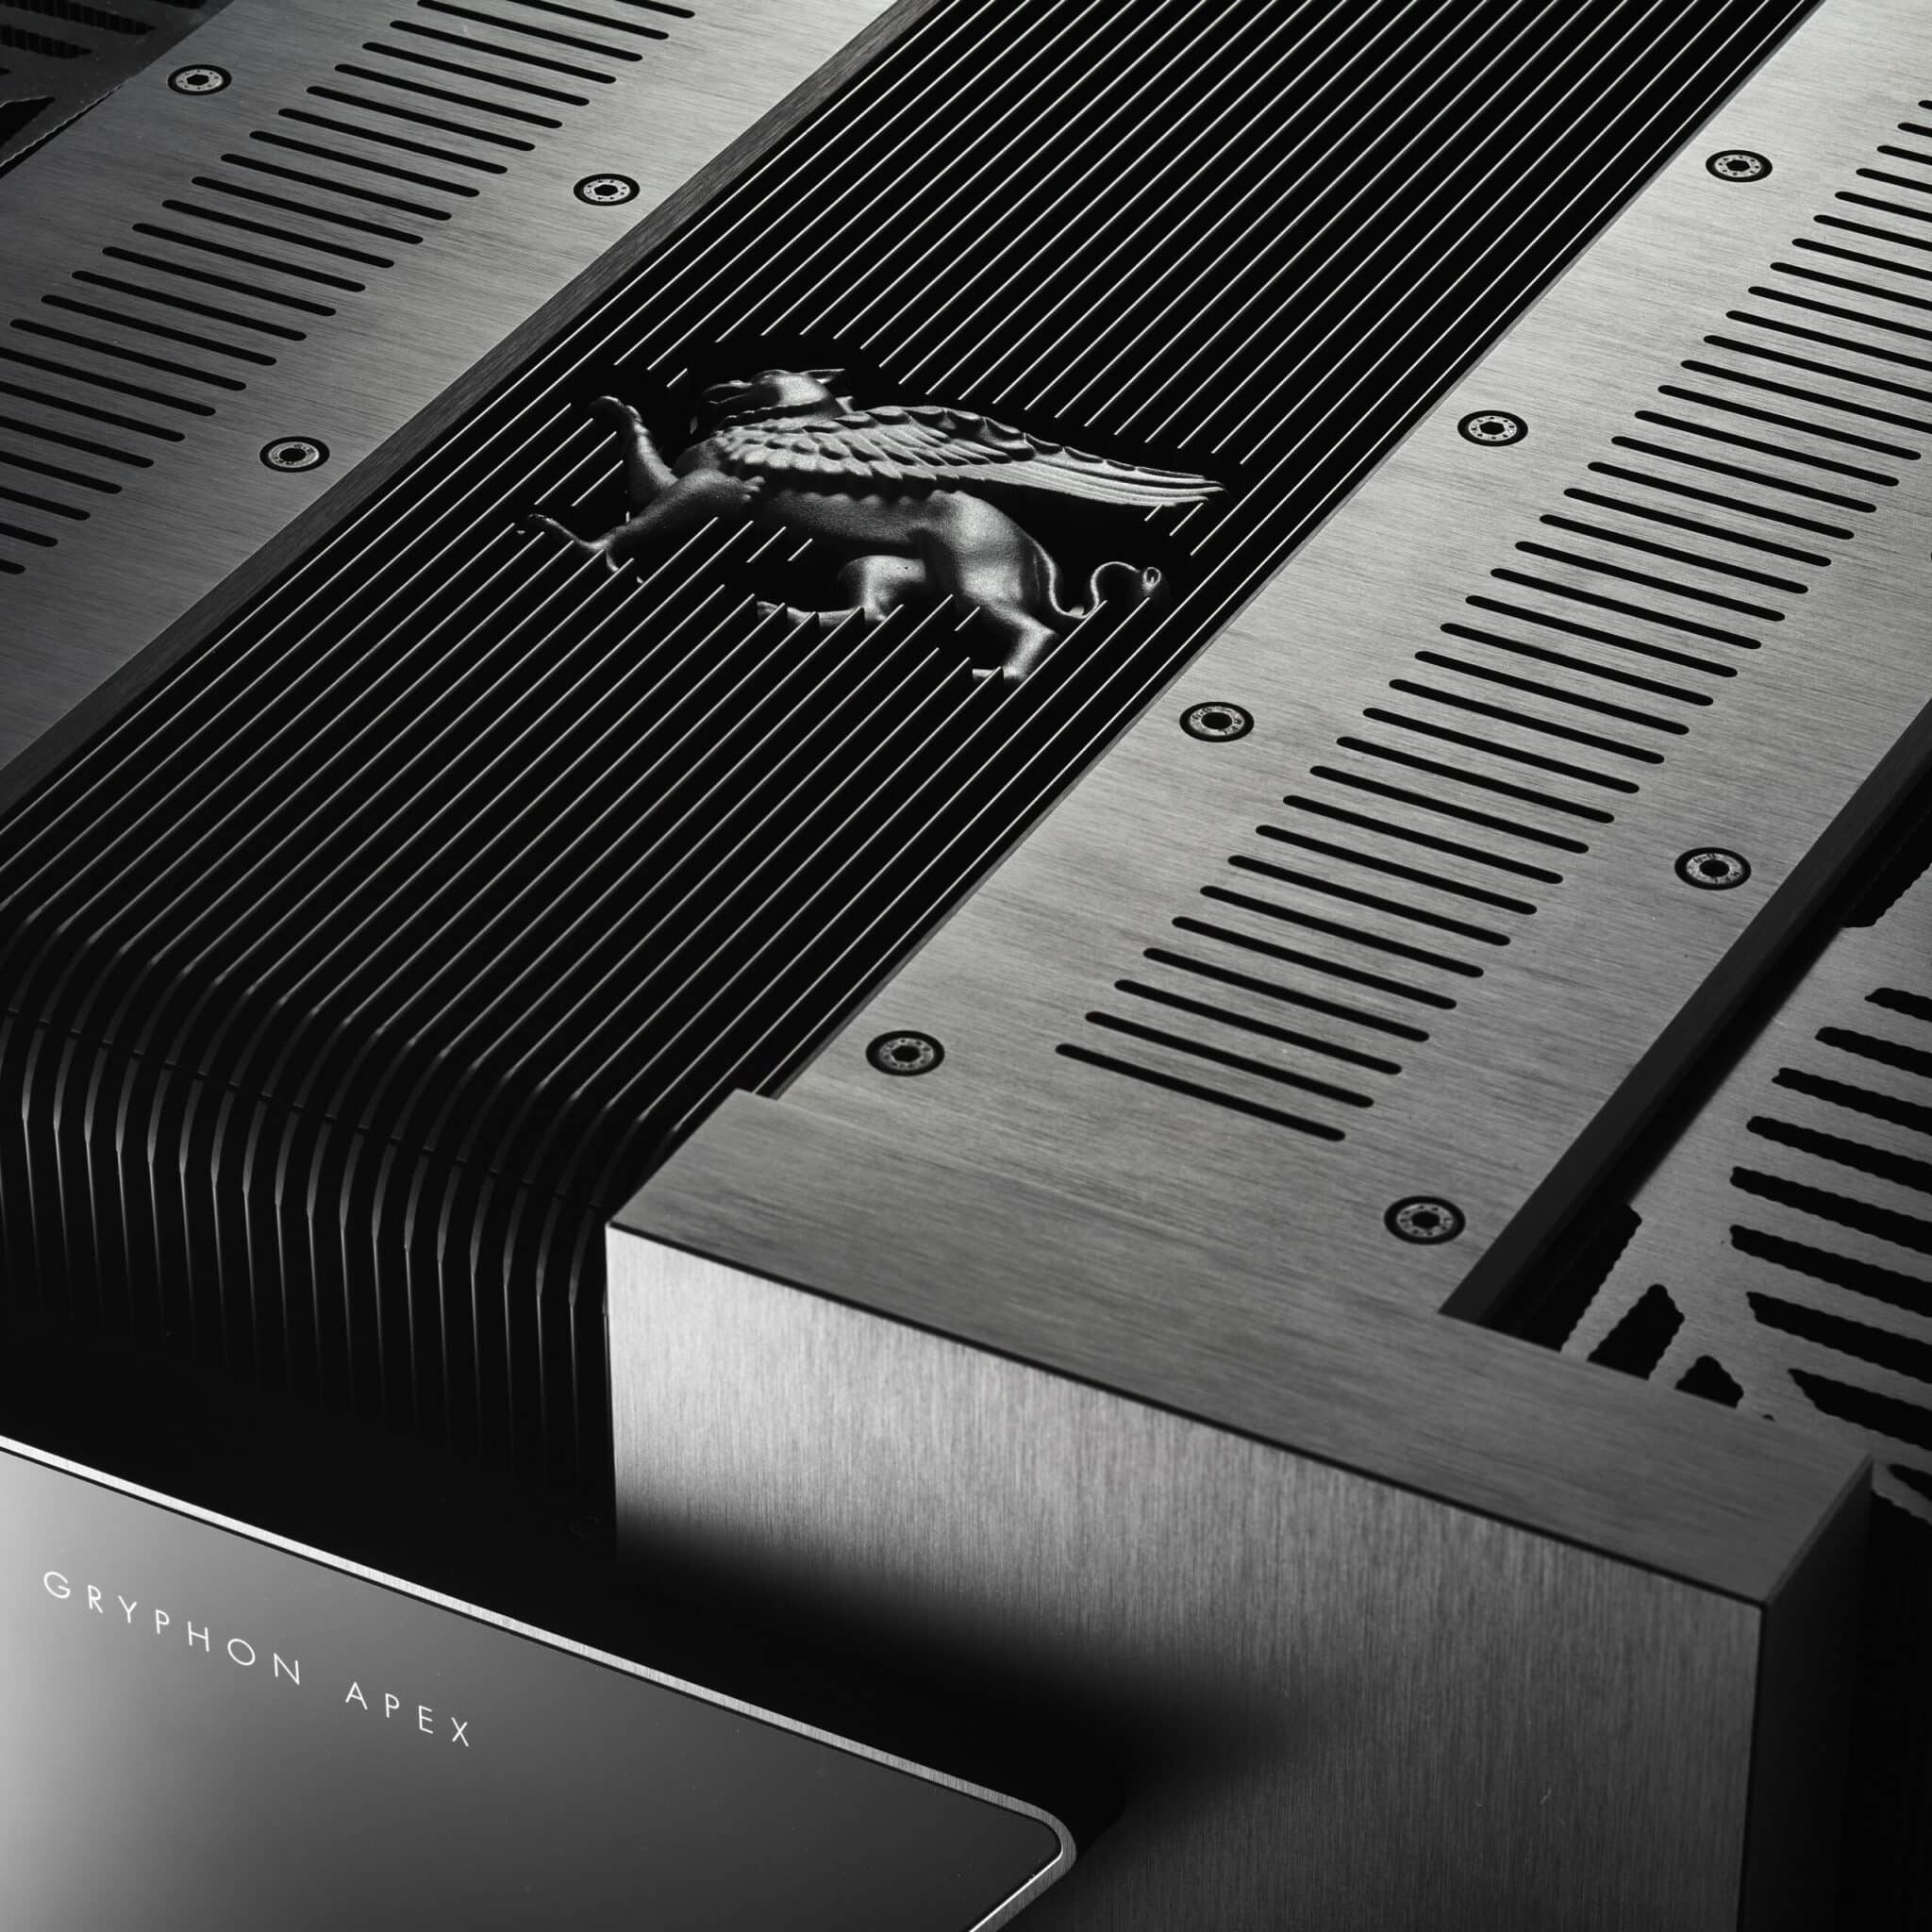 THE GRYPHON Apex MONO Power Amplifier (Email or Call For Availability)